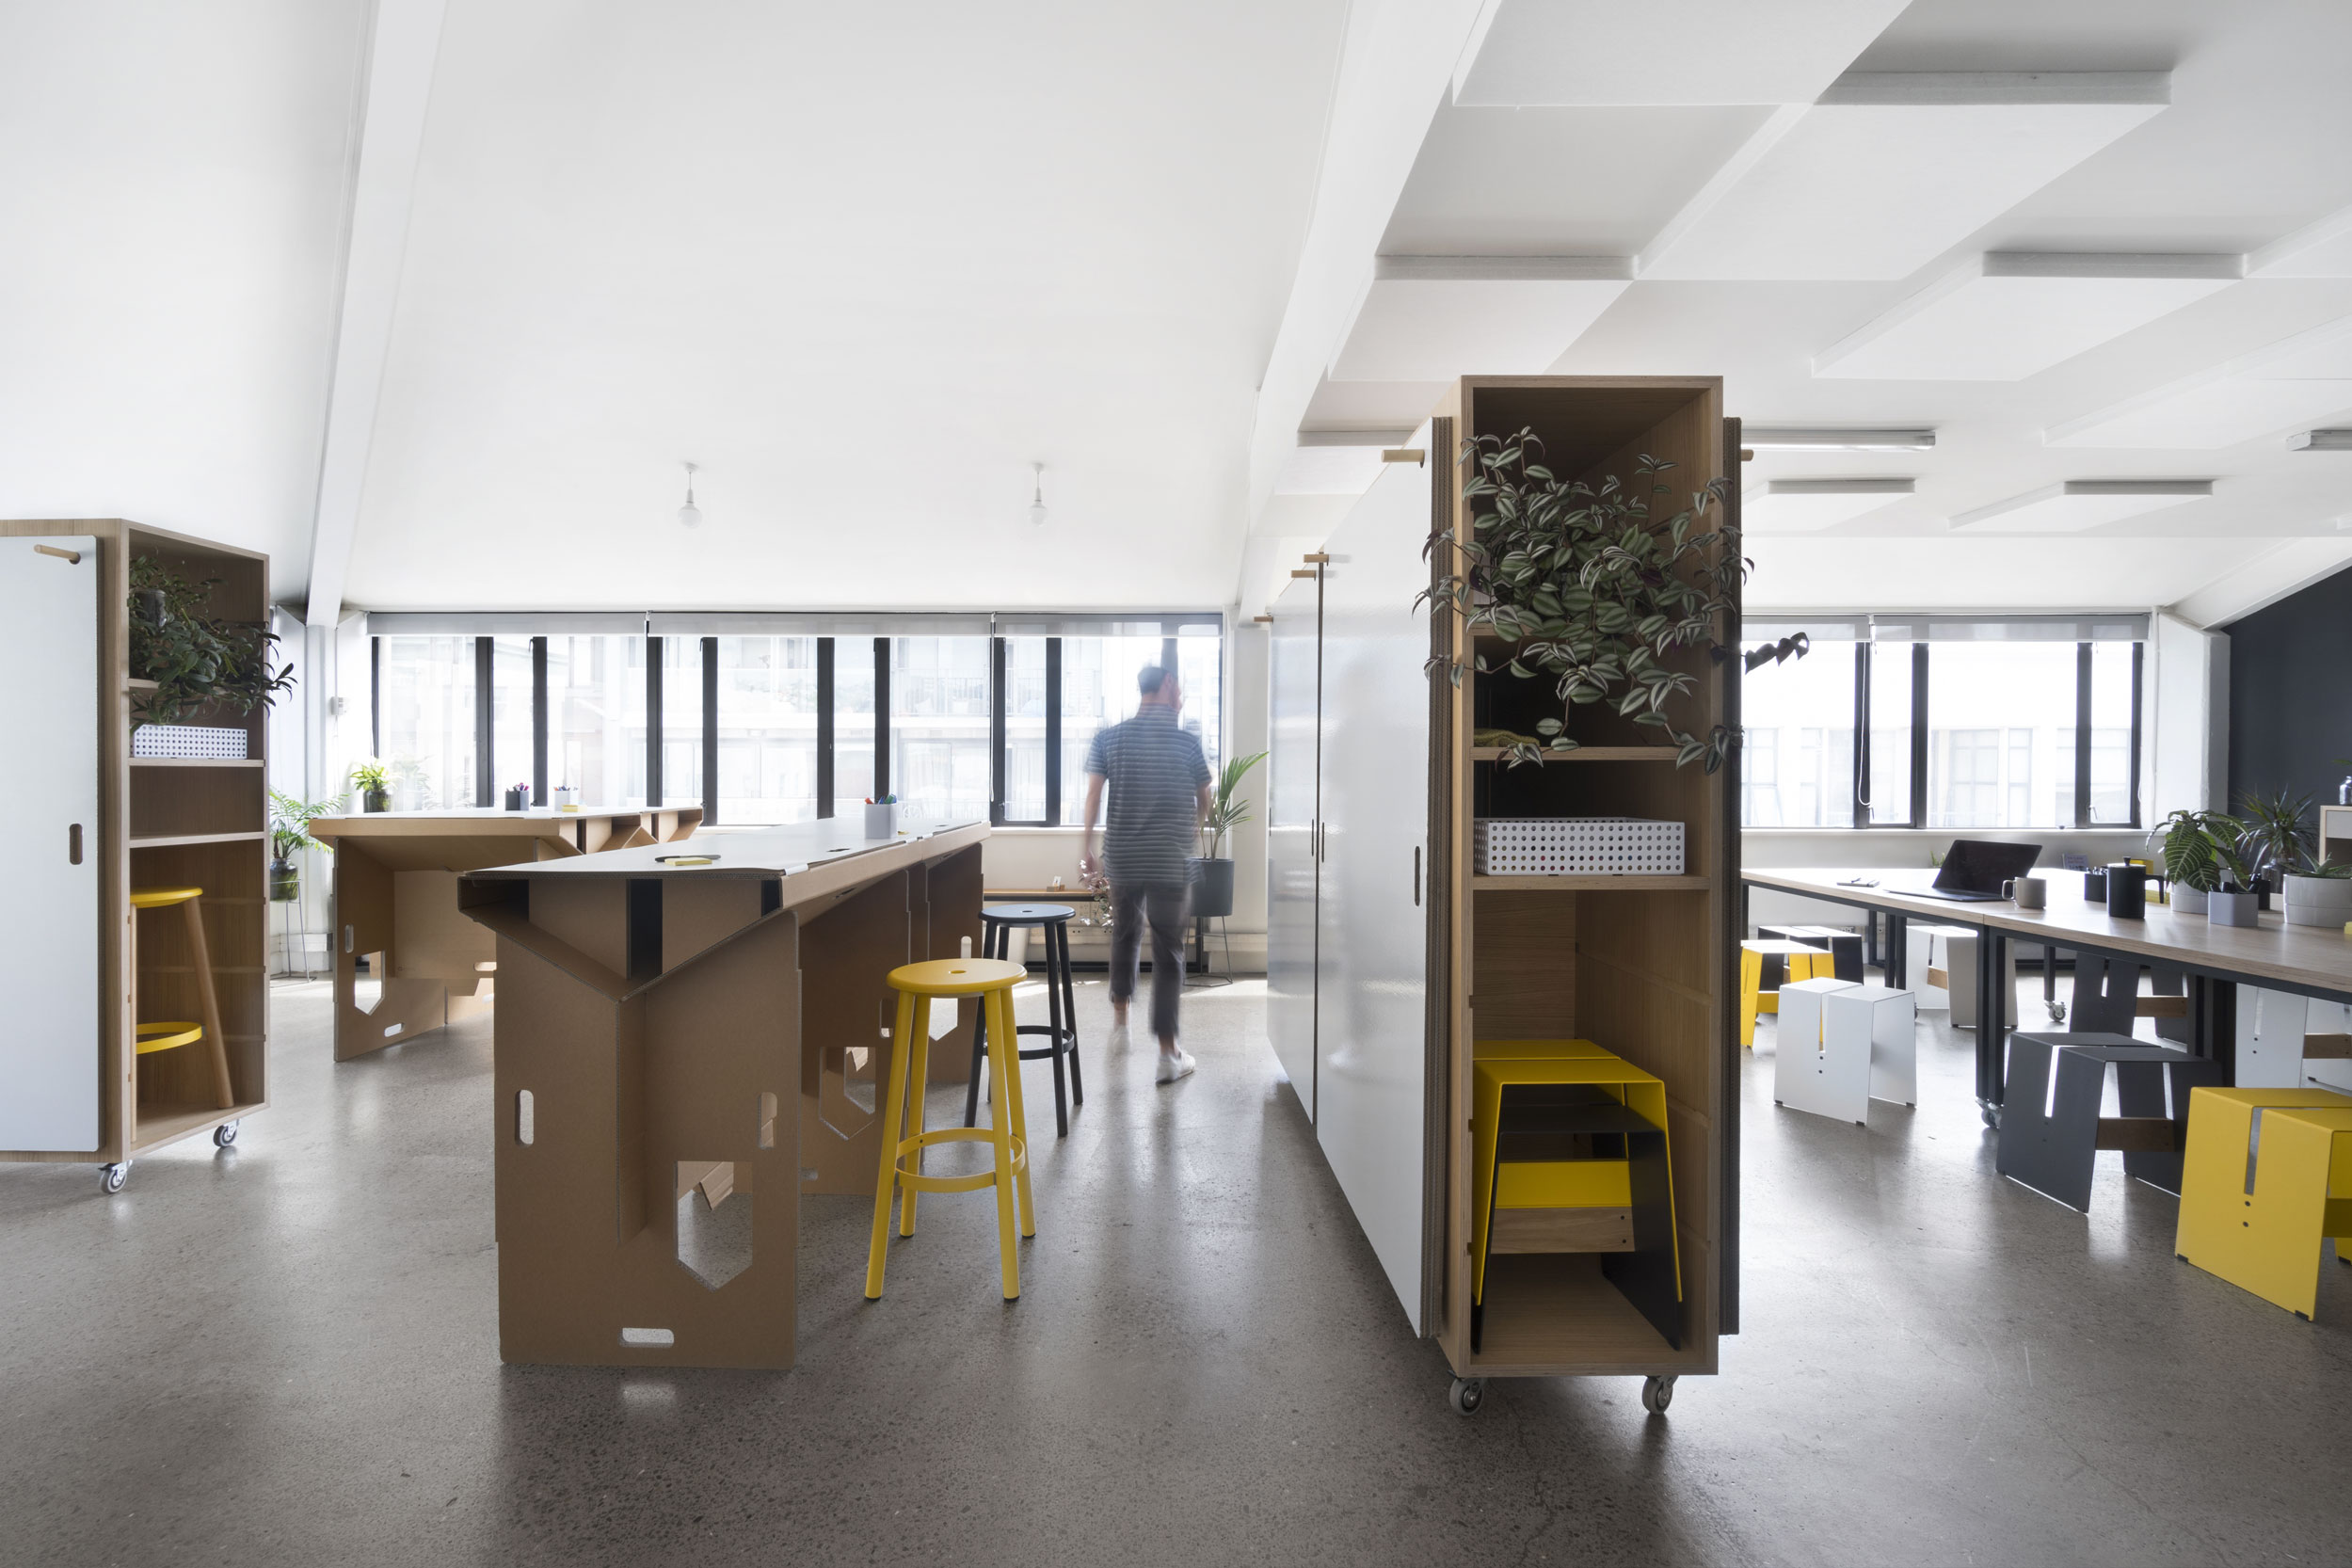 A space for hire designed to enable quality thinking 